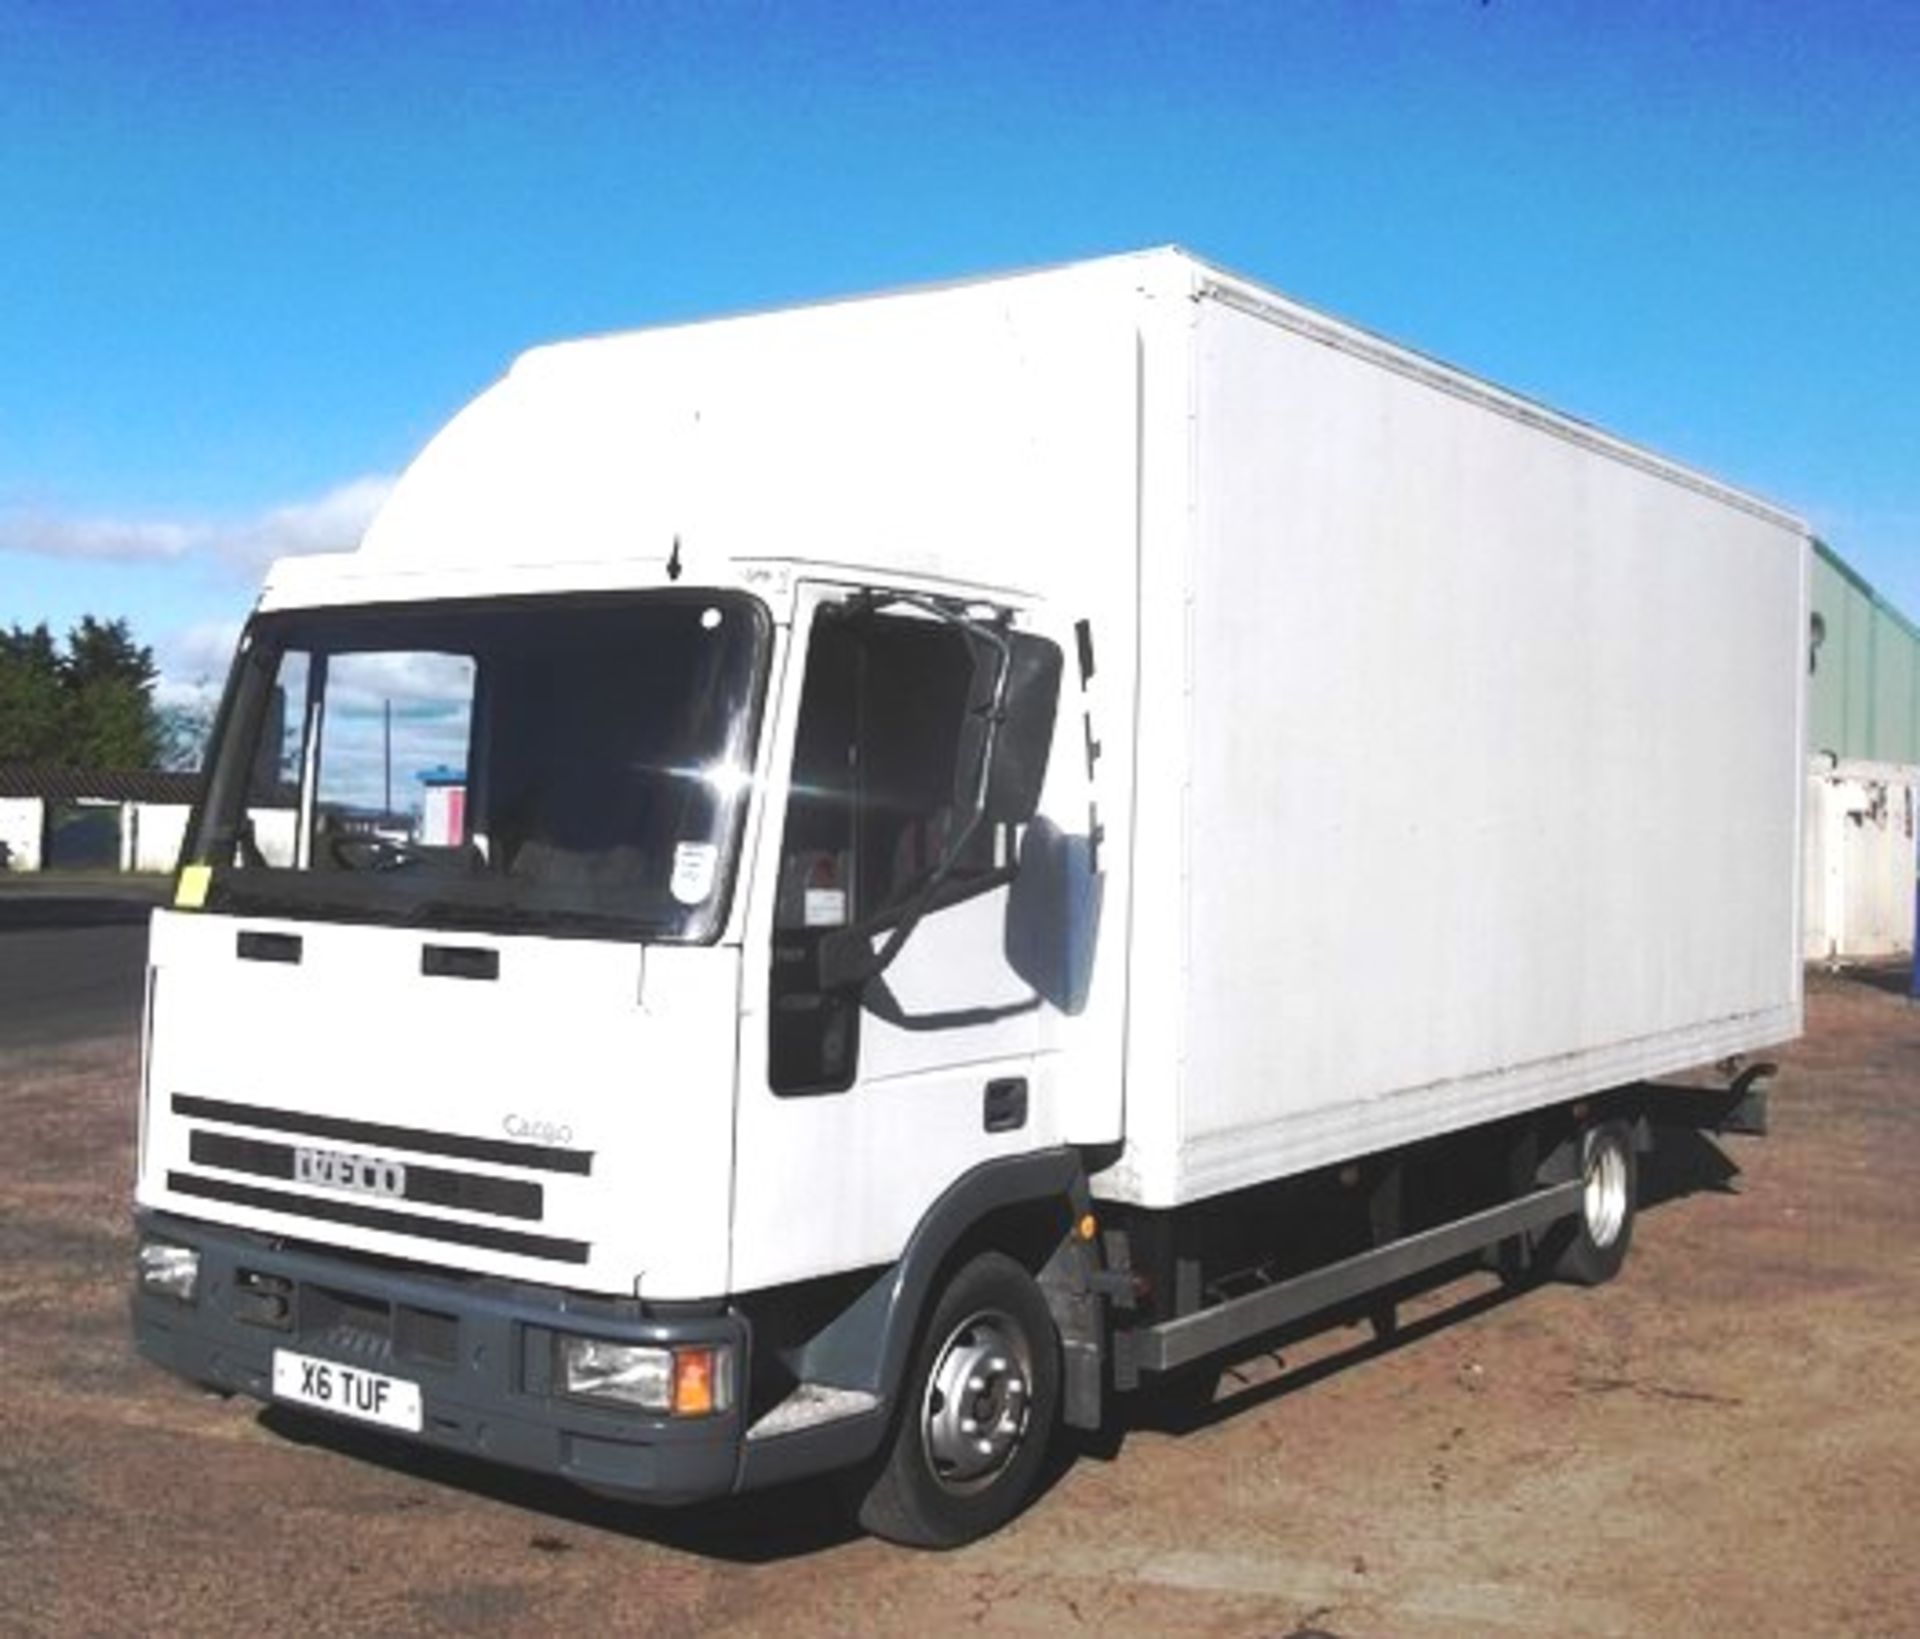 IVECO-FORD CARGO TECTOR - 3920cc
Body: 2 Dr Van
Color: White
First Reg: 05/03/2004
Doors: 2
MOT: